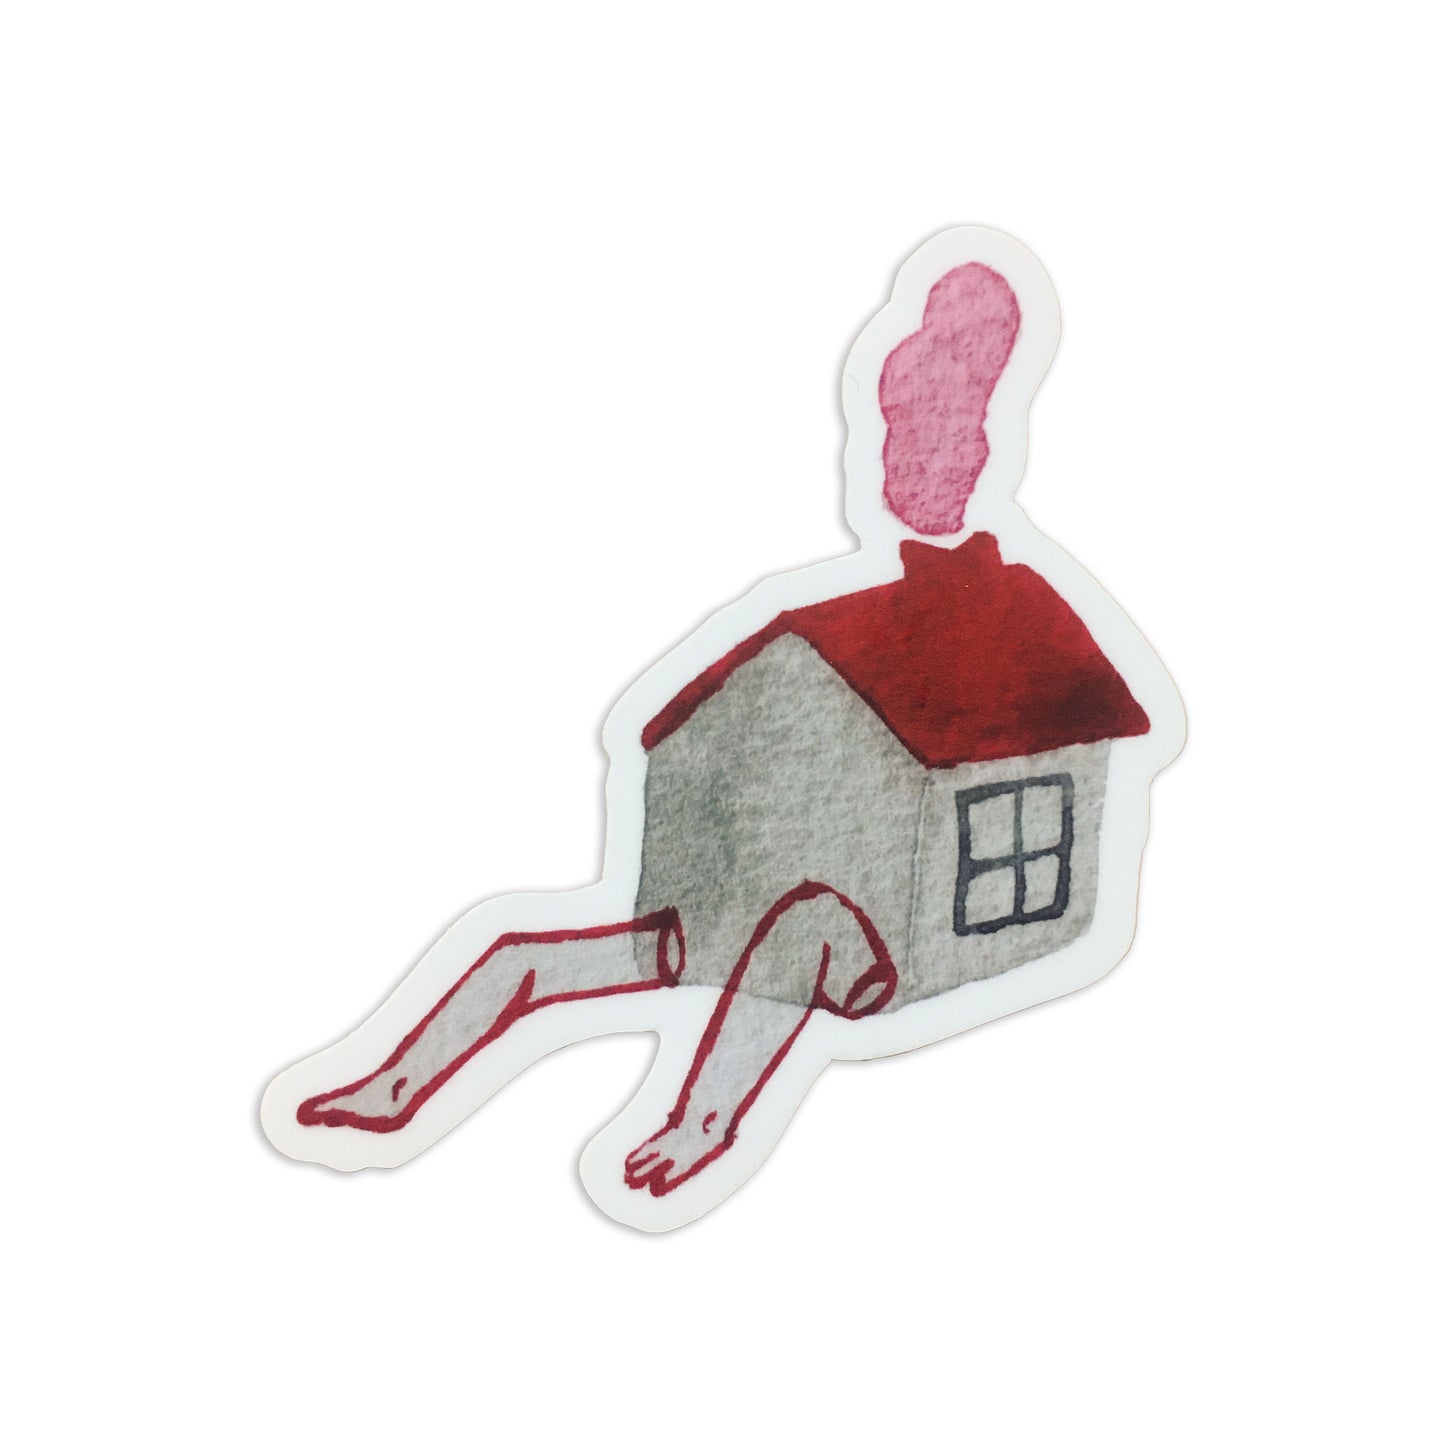 Walking house with legs sticker